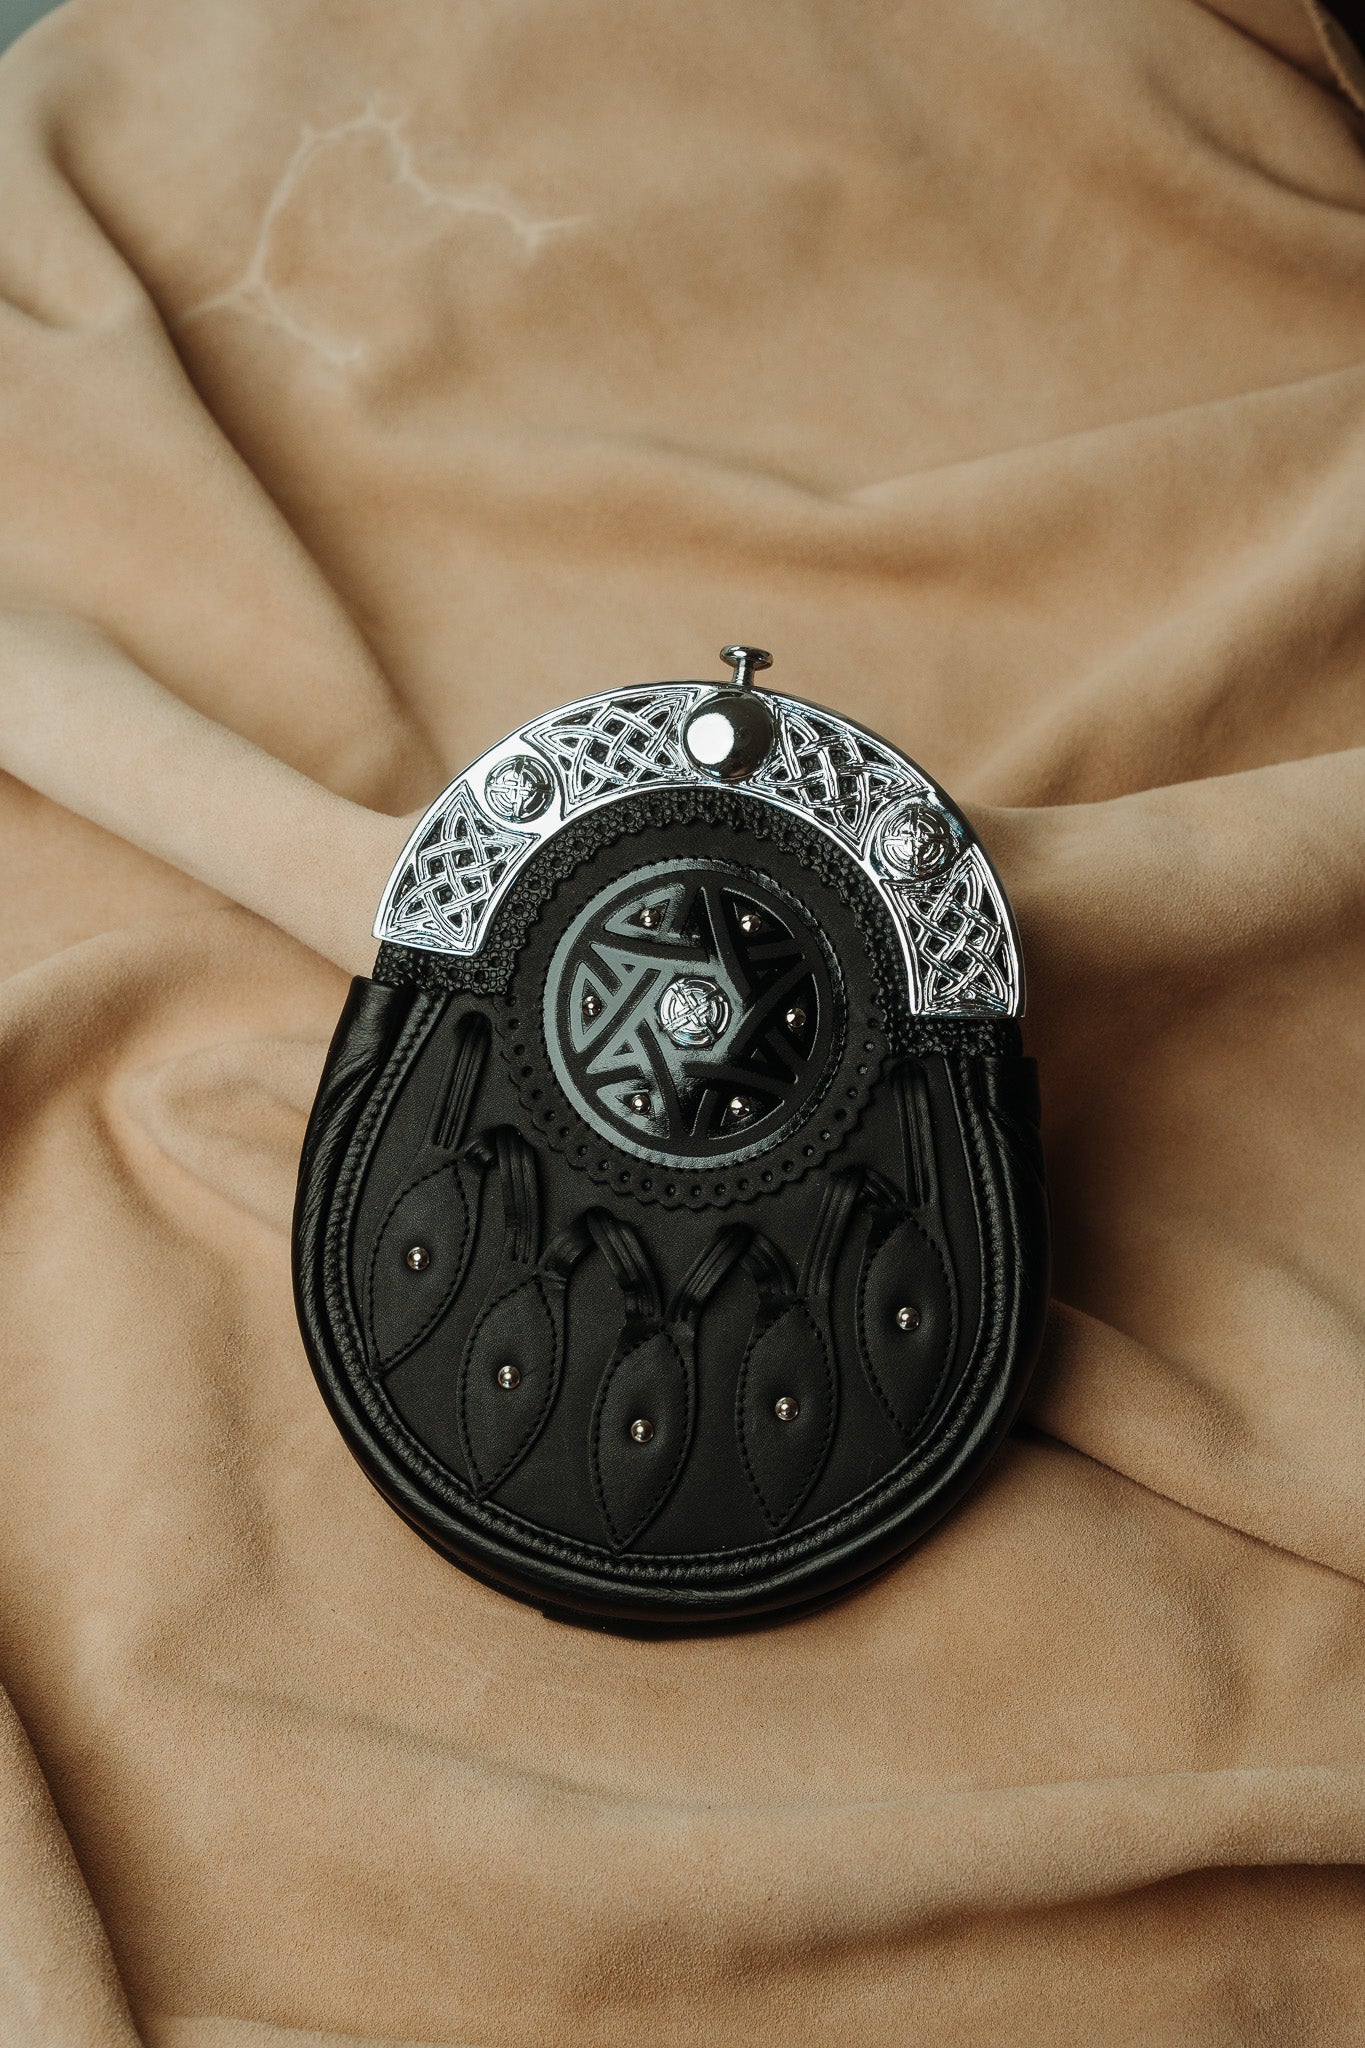 hunting sporran version features the standard 5 smooth leather petals, chrome cantle with celtic knotwork and a center targe with embossed Celtic artwork